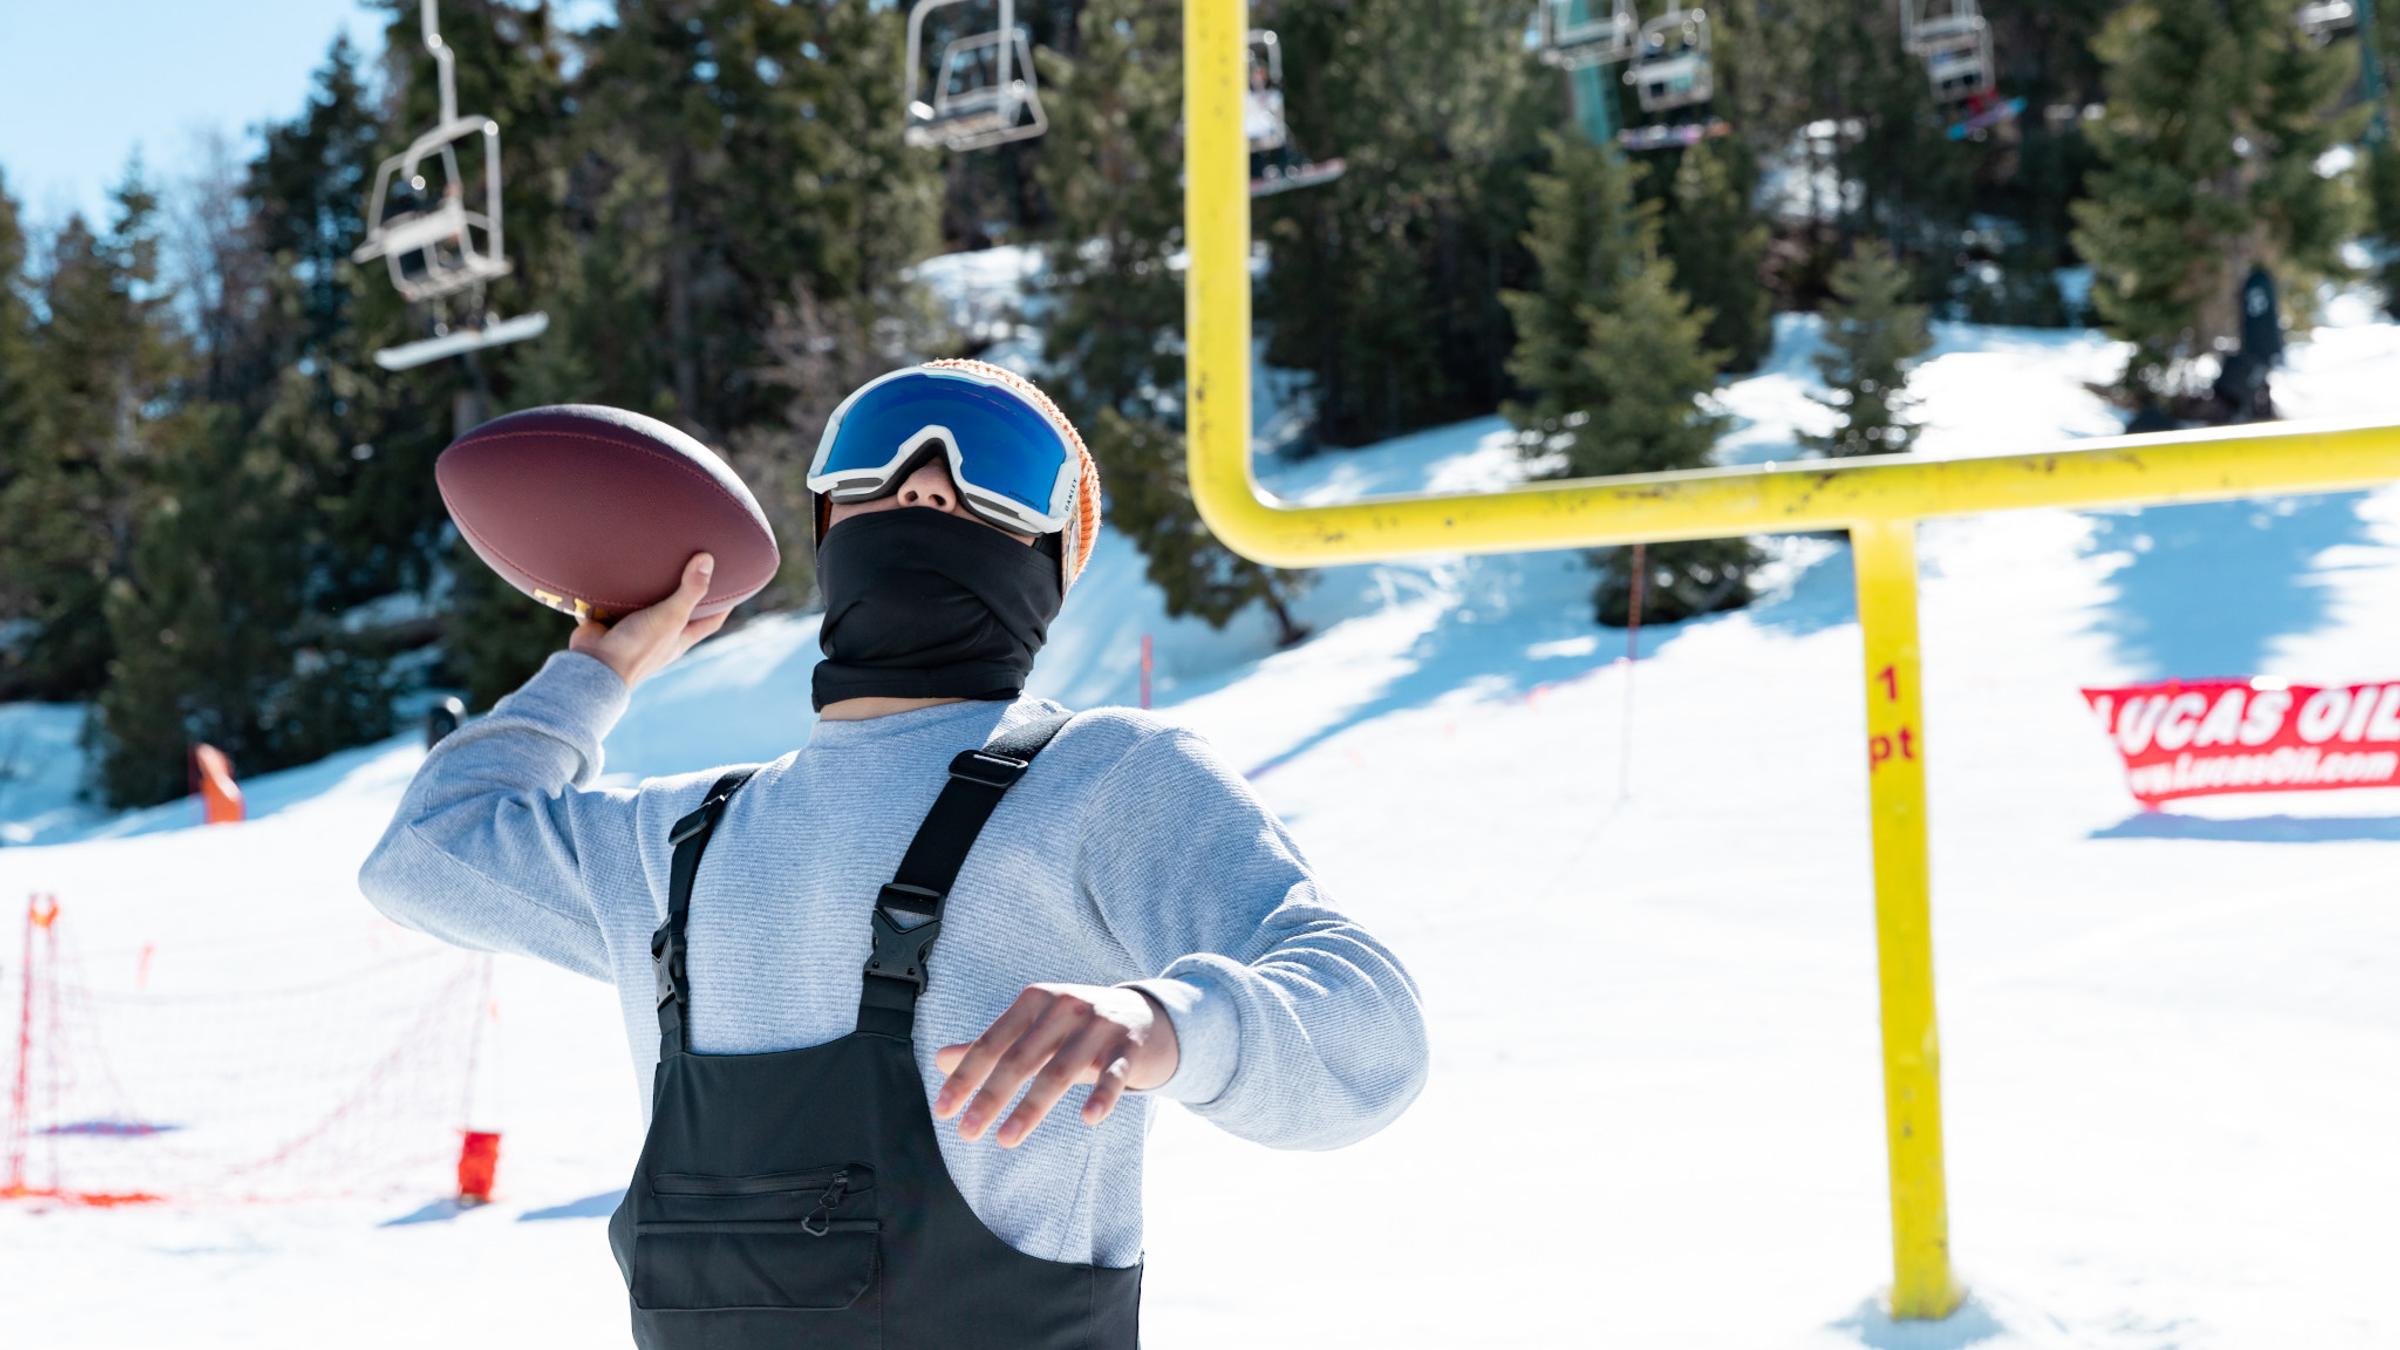 Snowboarder throwing a football